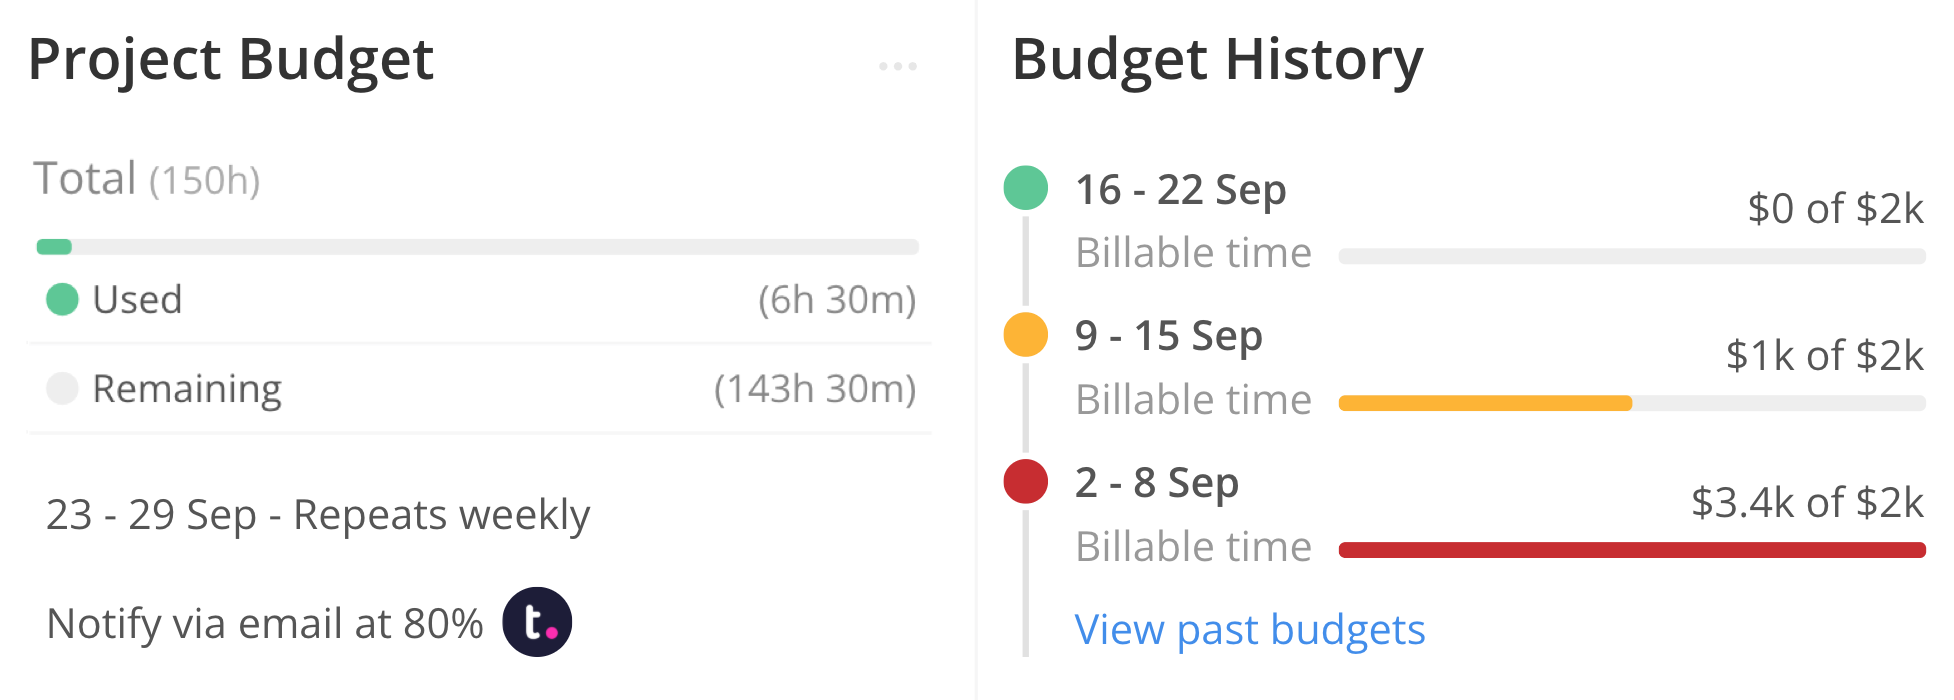 project budget history in Teamwork